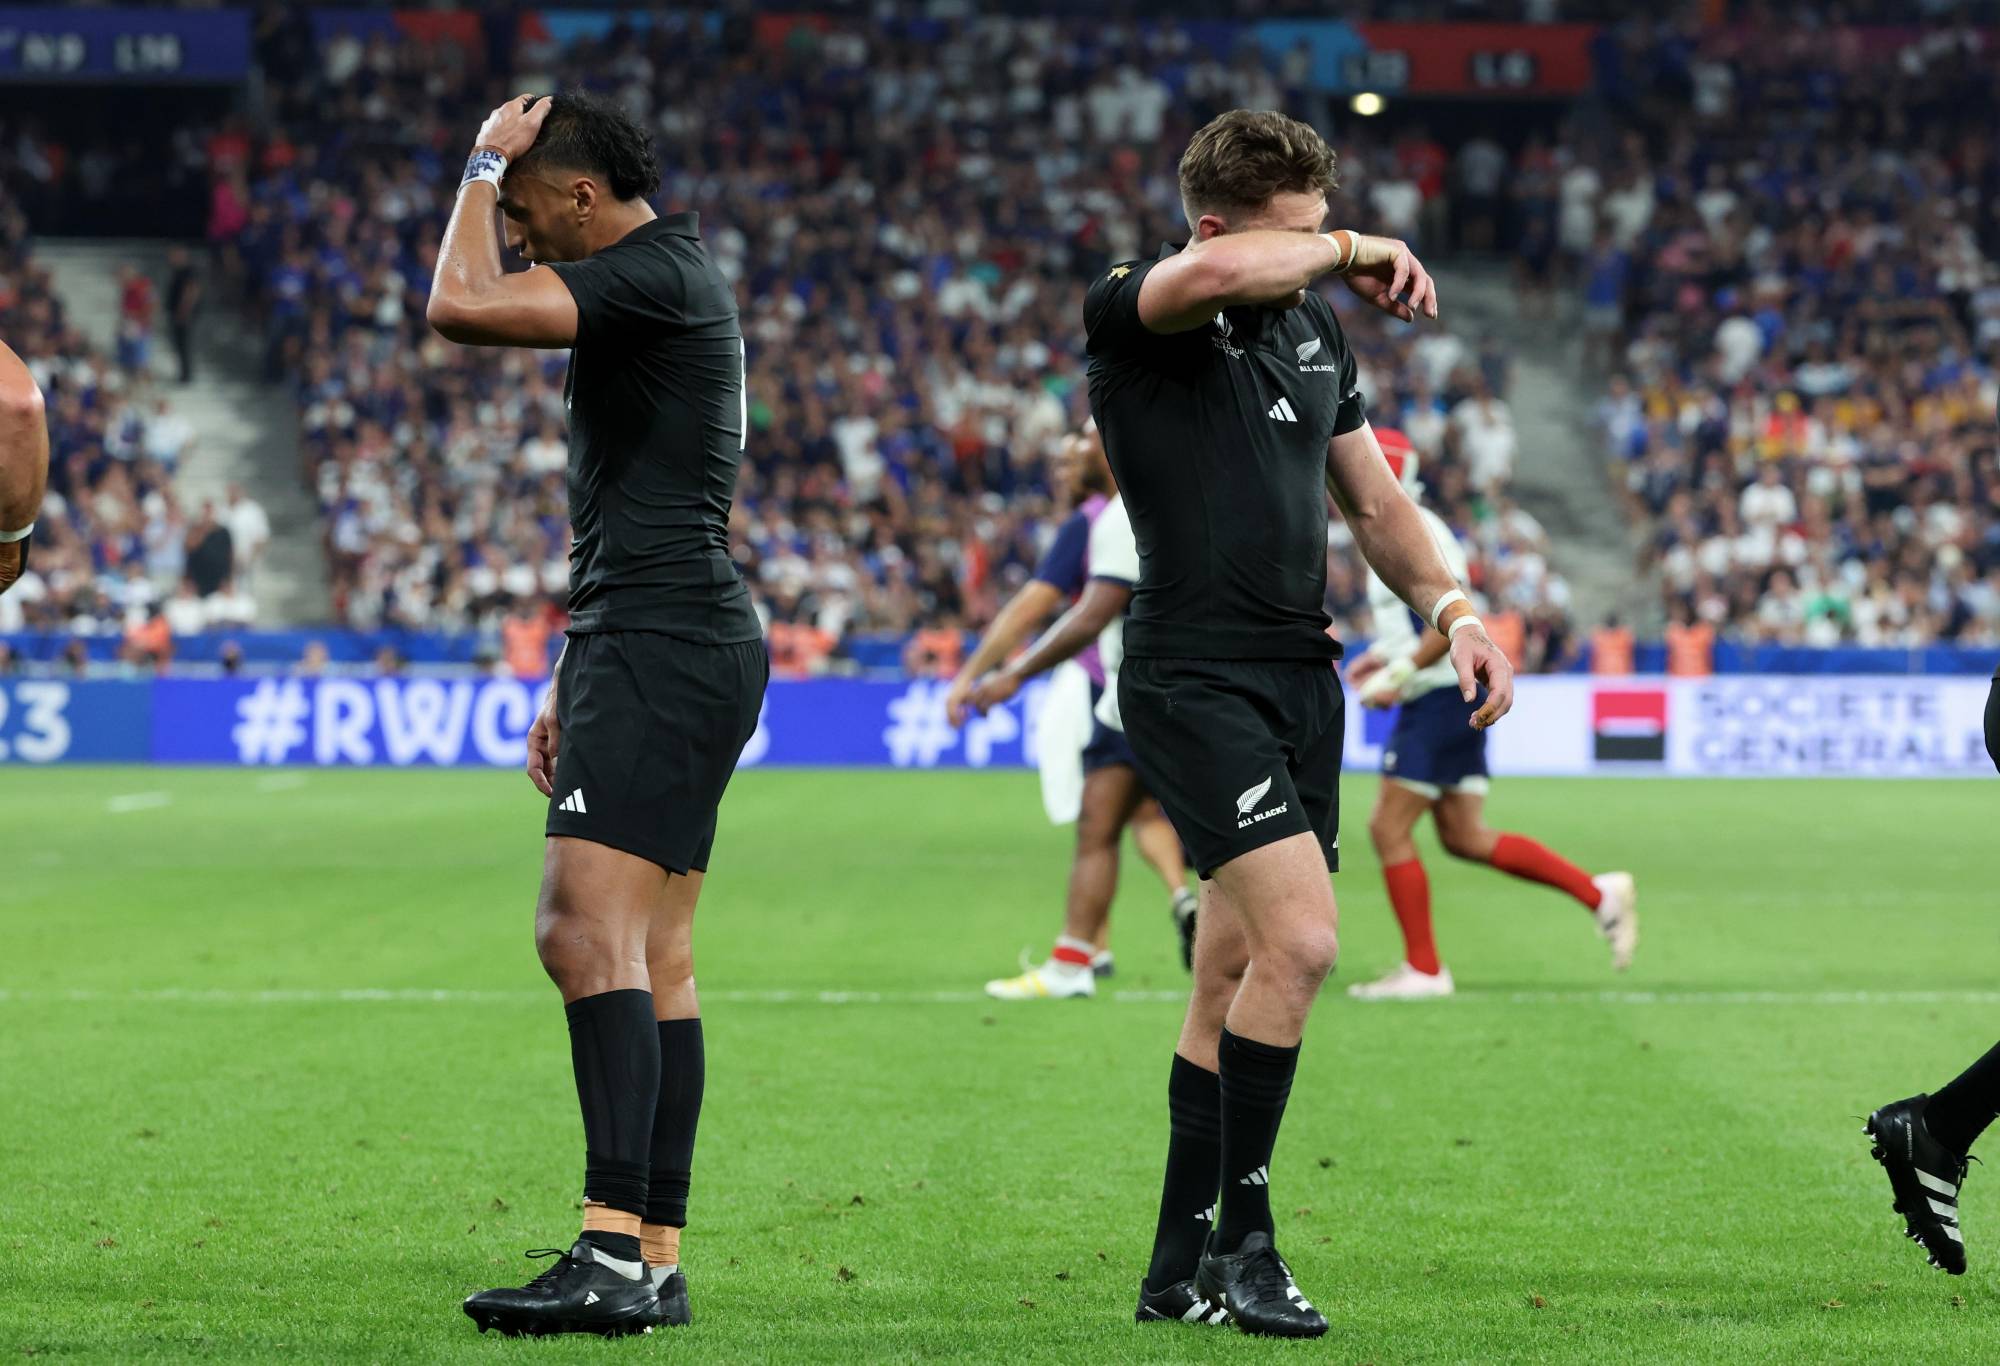 Players of Team New Zealand are disappointed after the defeat during the Rugby World Cup France 2023 match between France and New Zealand at Stade de France on September 08, 2023 in Paris, France. (Photo by Xavier Laine/Getty Images)